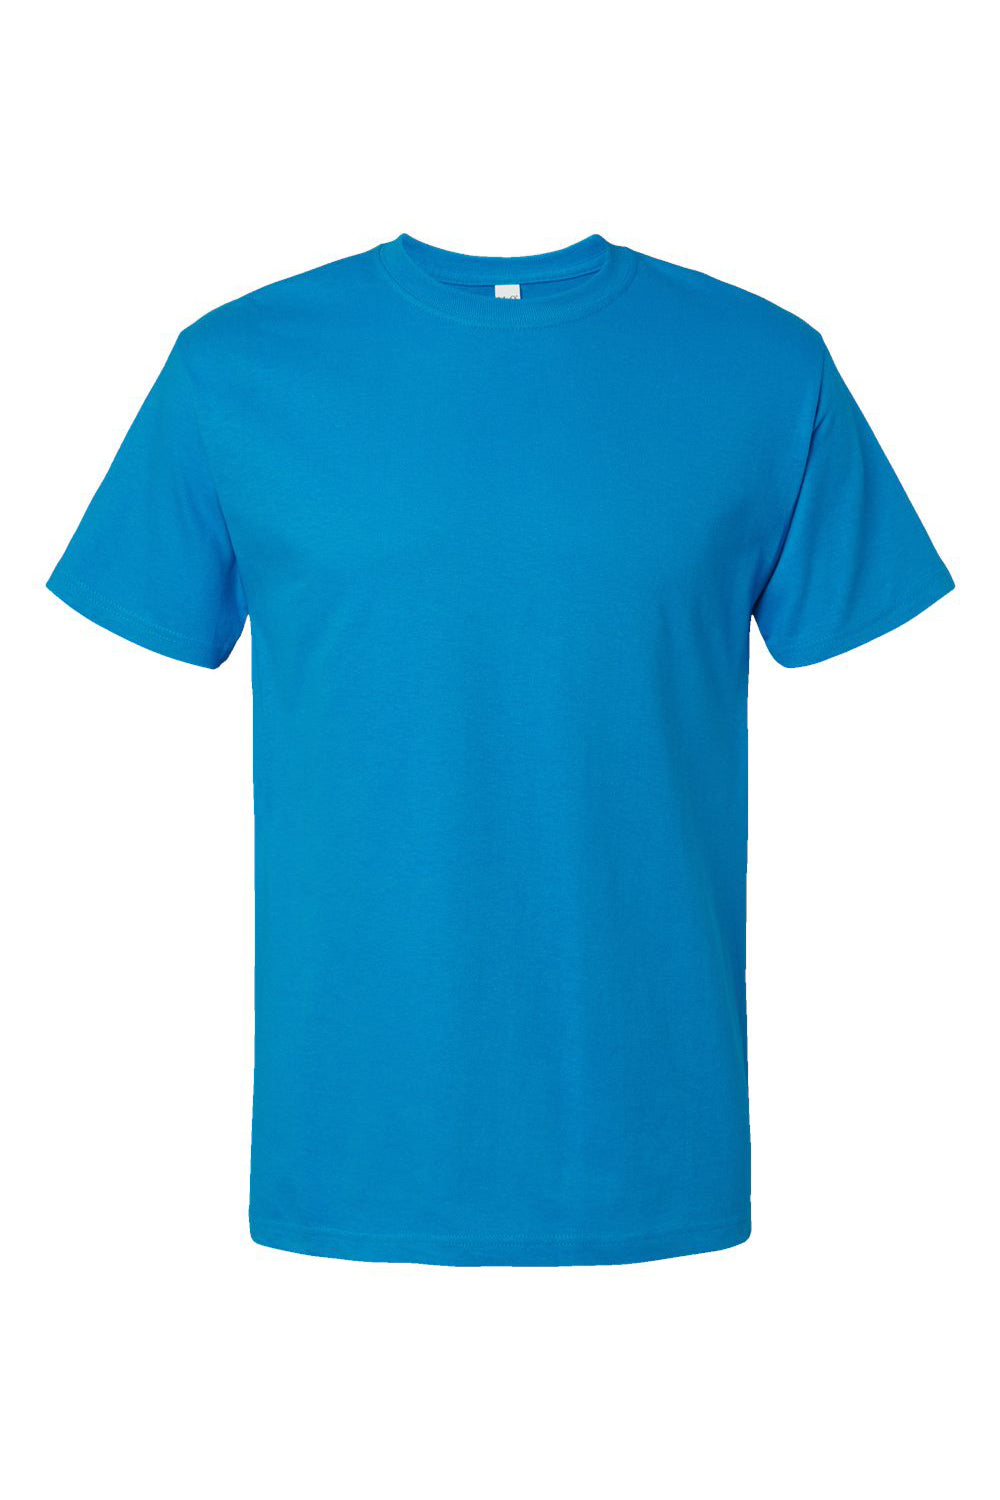 M&O 4800 Mens Gold Soft Touch Short Sleeve Crewneck T-Shirt Turquoise Blue Flat Front